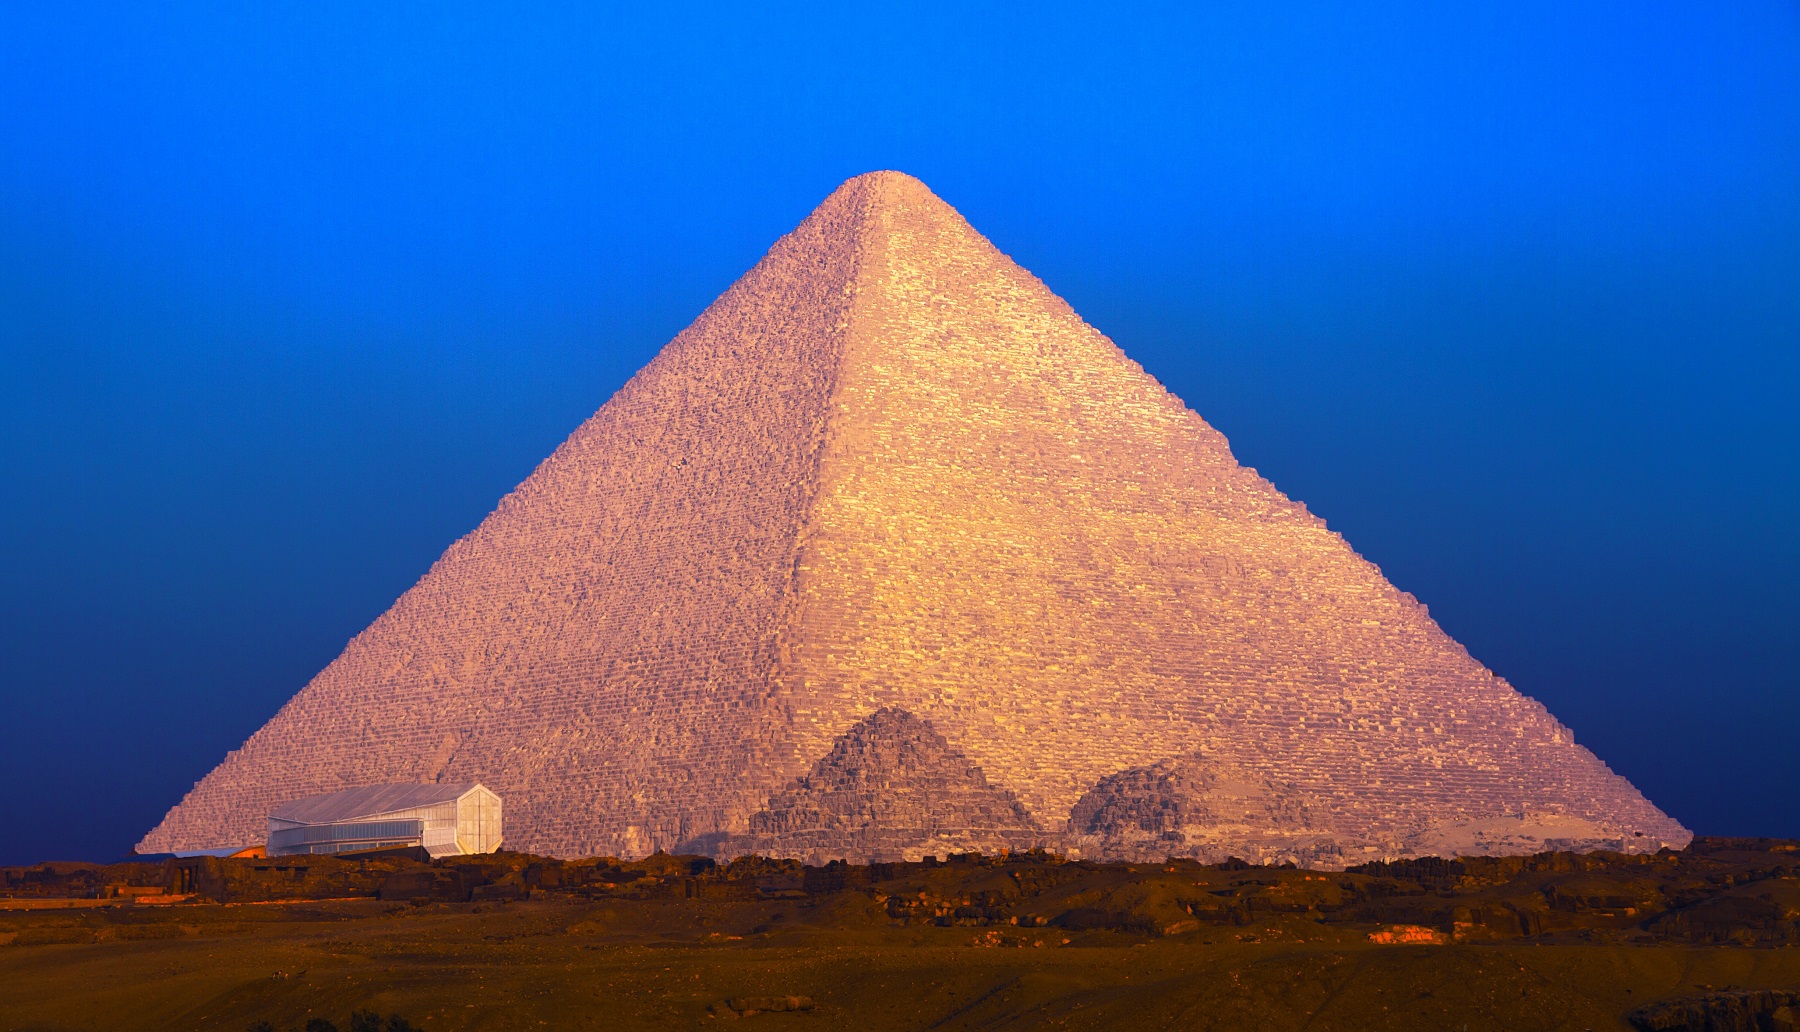 An image of the Great Pyramid of Giza. Shutterstock.